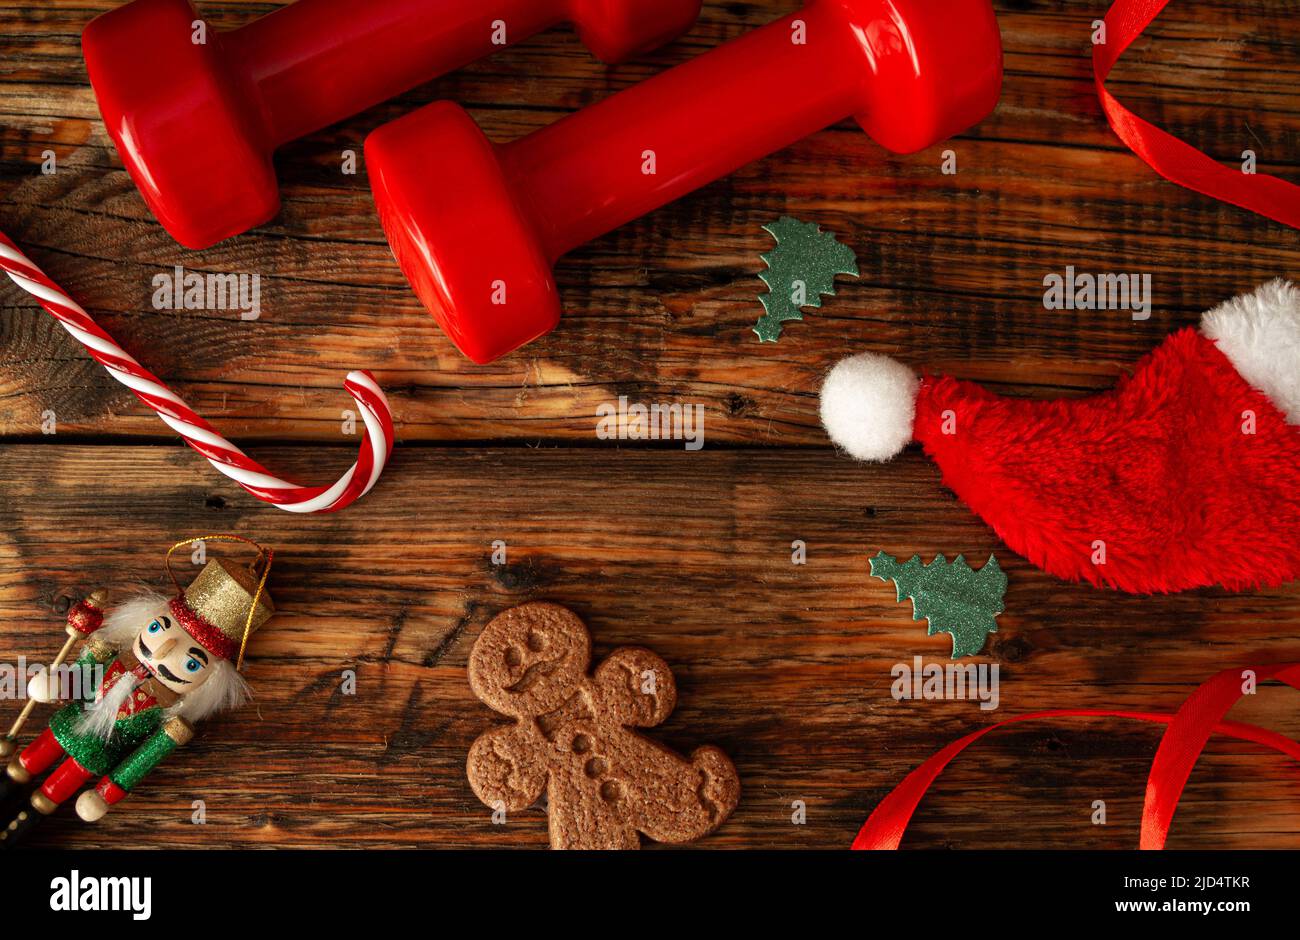 Christmas gym composition concept with dumbbells, candy cane, Santa Claus hat, gingerbread man cookie, tree ornaments and nutcracker figure. Stock Photo